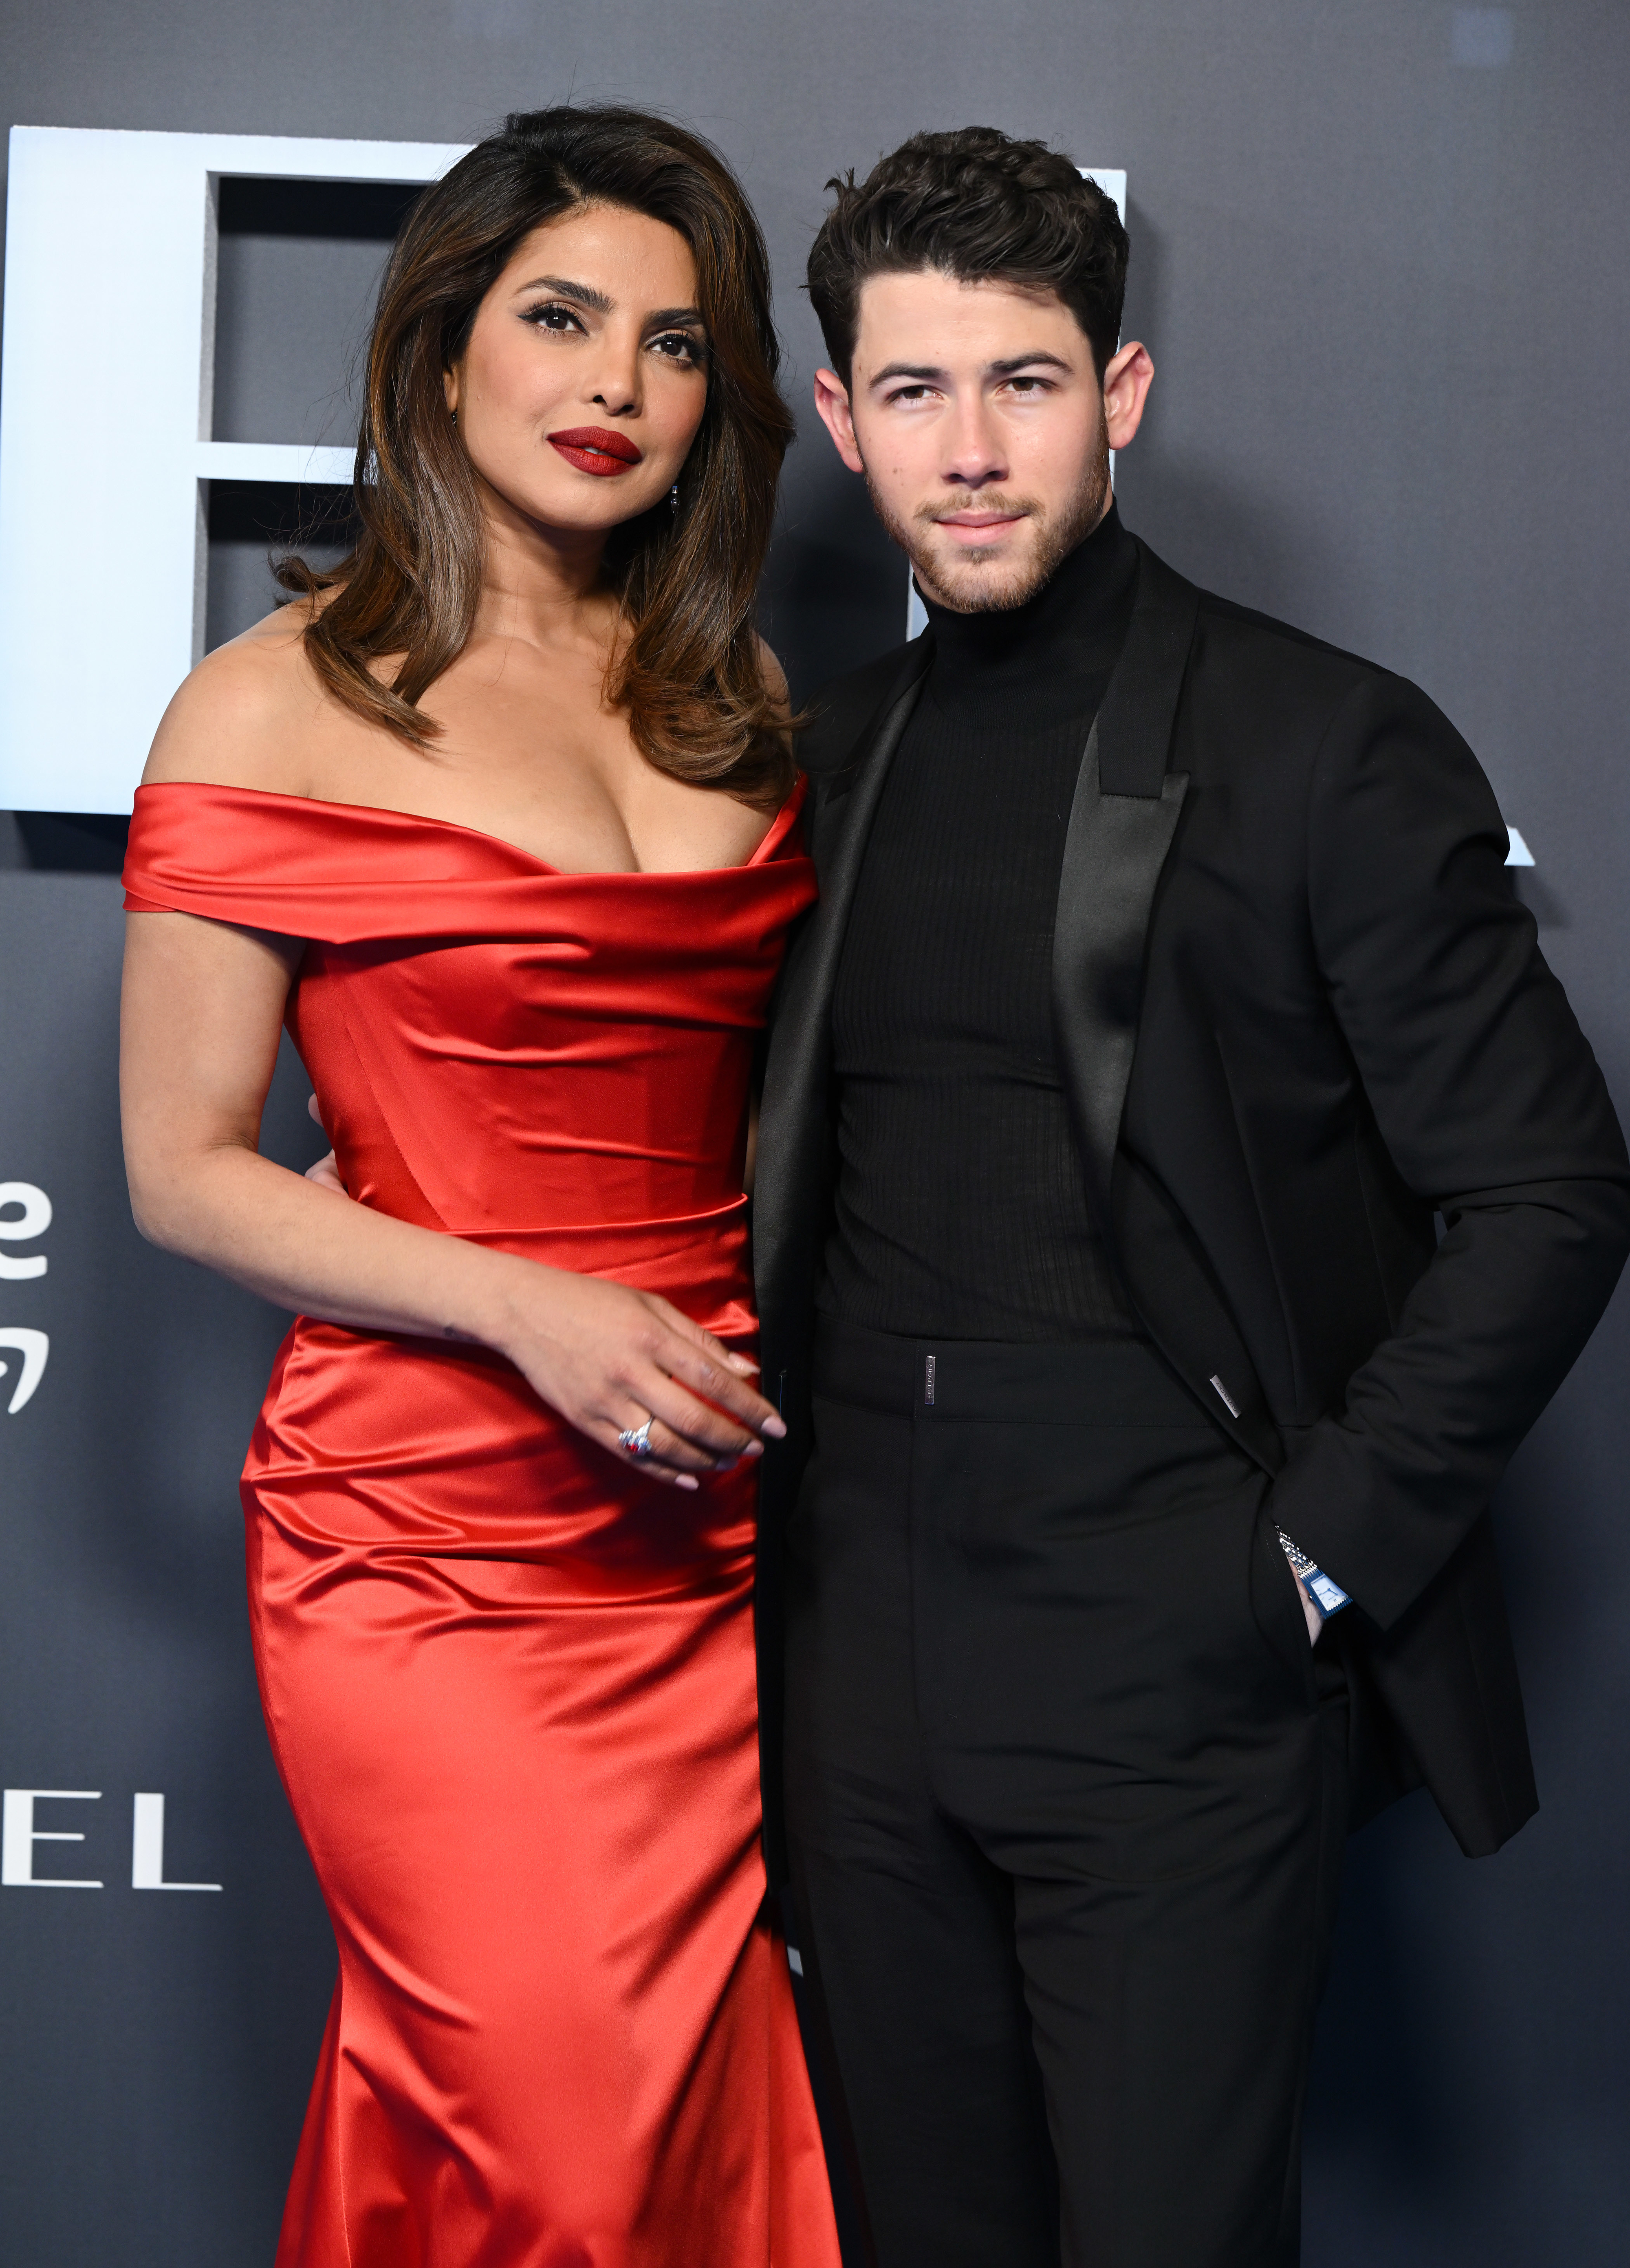 Priyanka Chopra in a satin off-shoulder gown and Nick Jonas in a sleek suit posing together